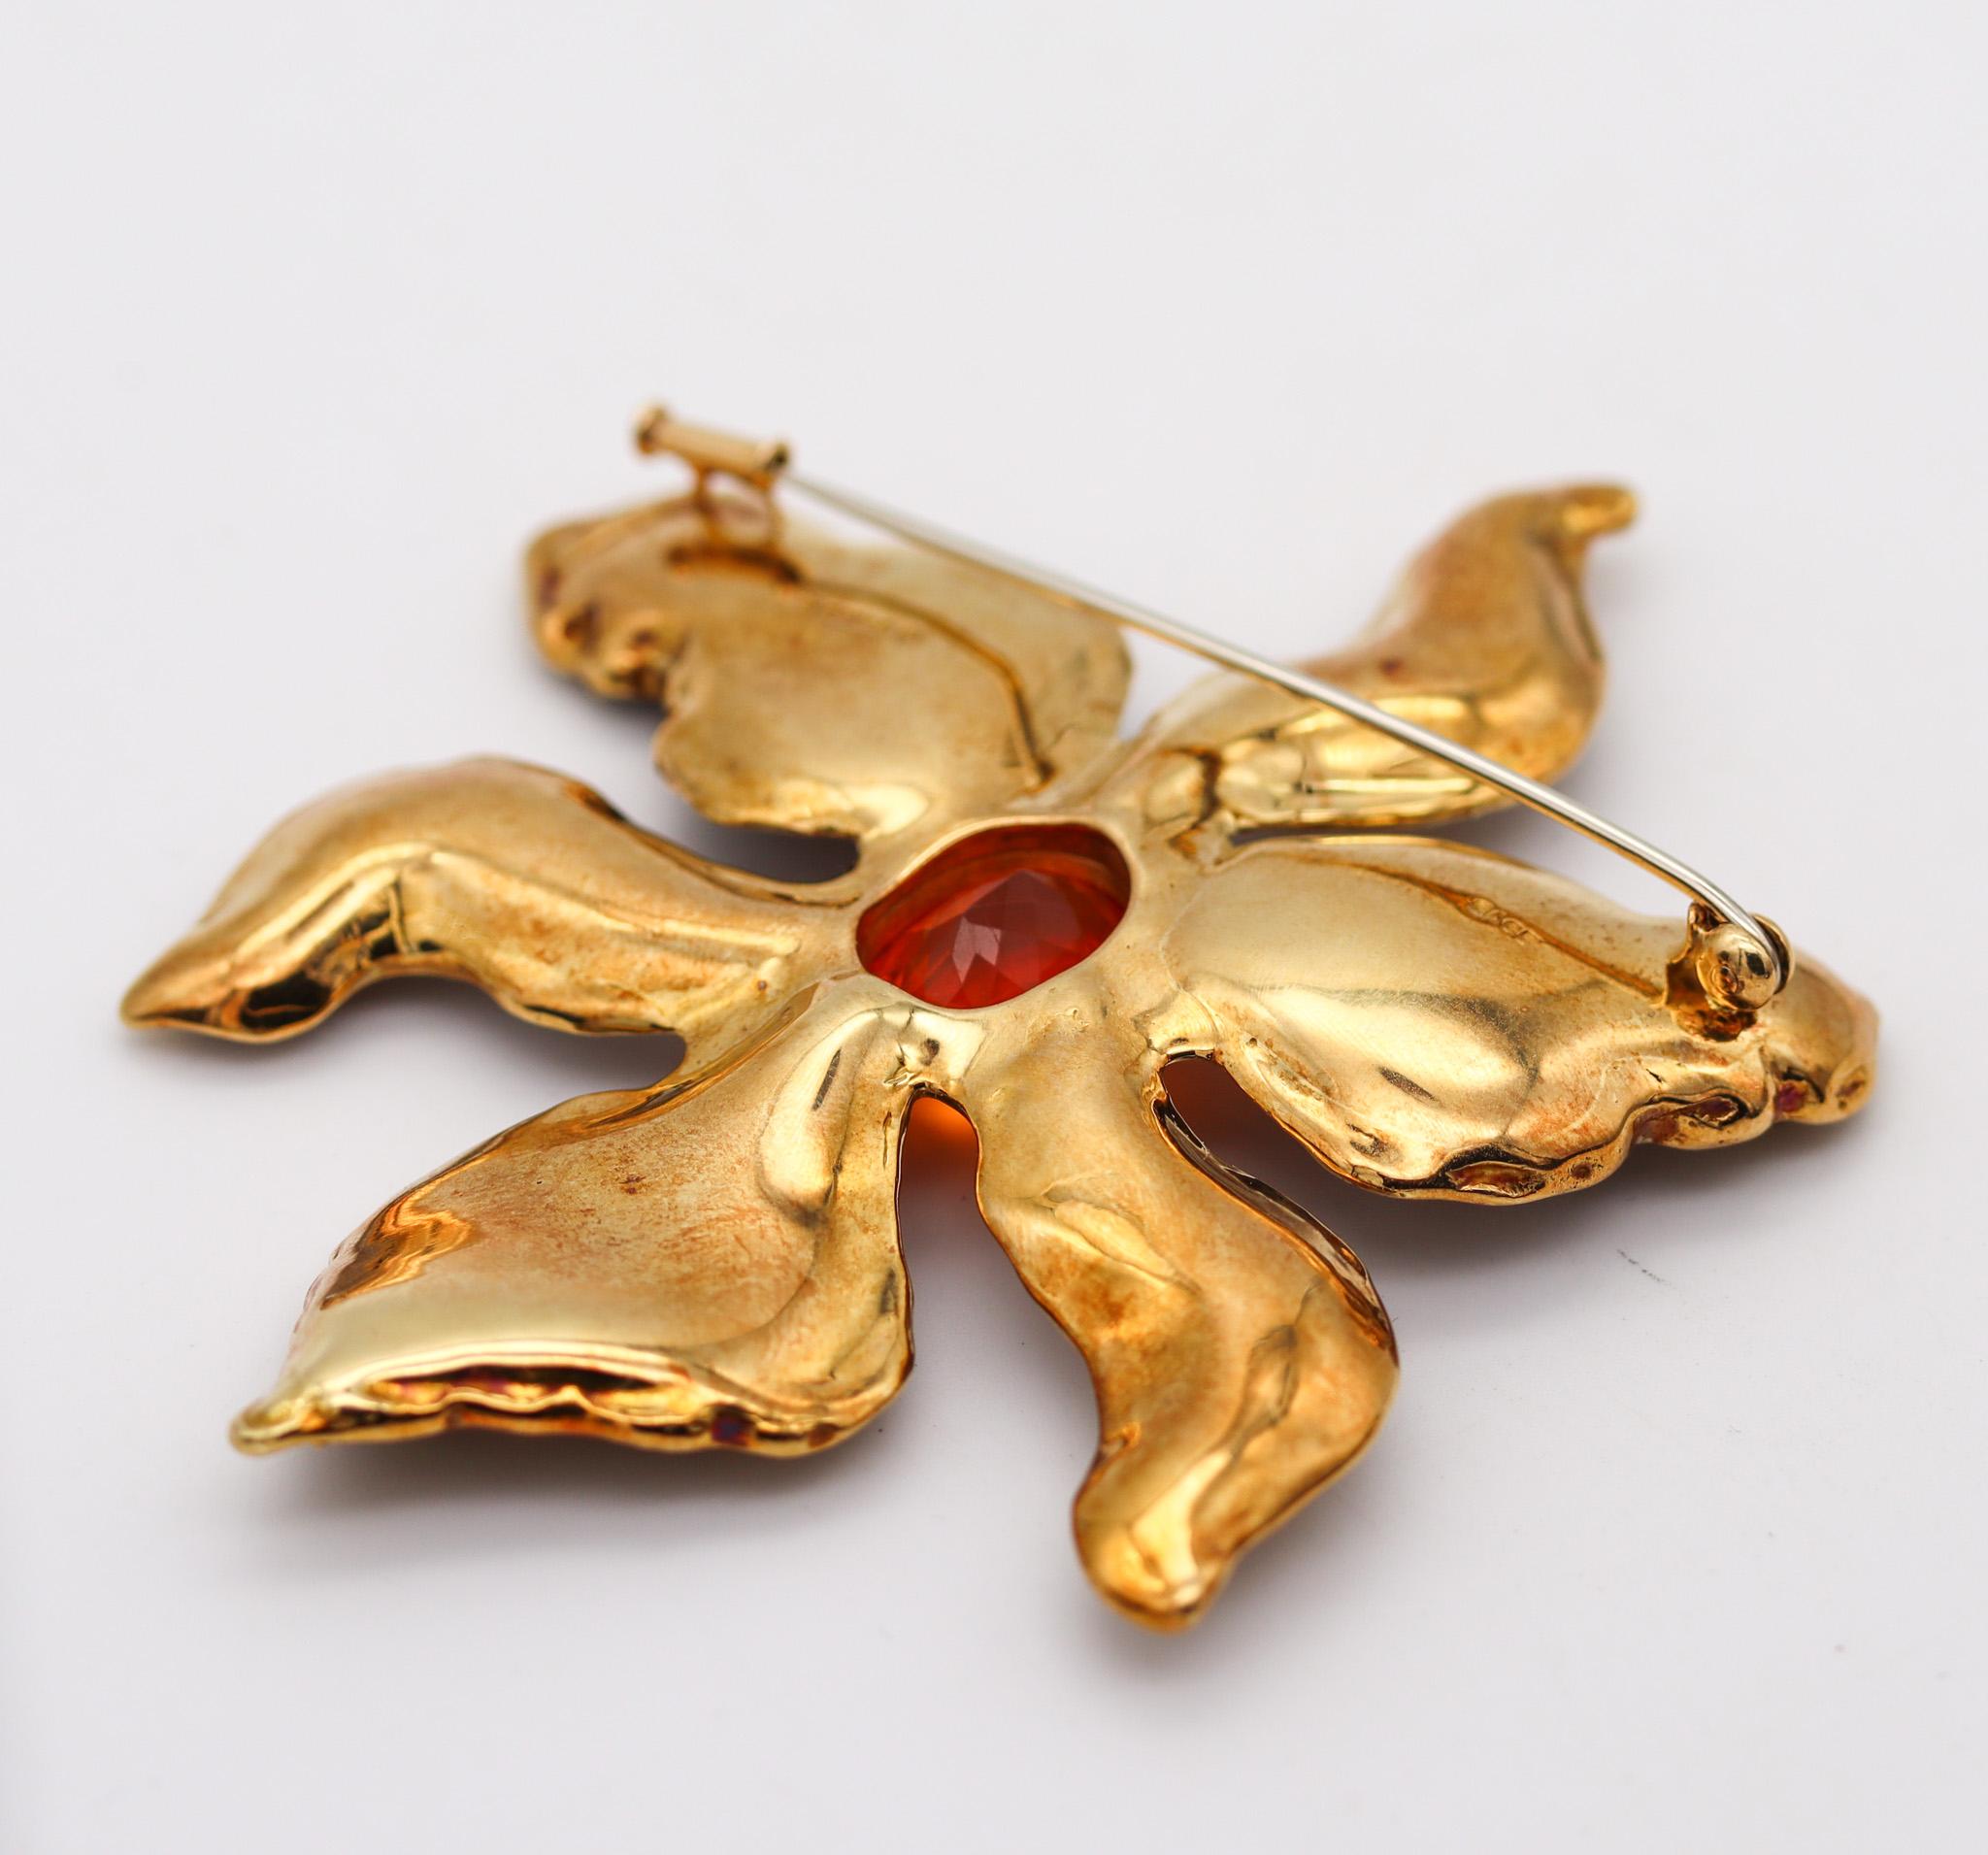 Modernist Elizabeth Gage 1994 London Orchid Agate Pendant Brooch 18Kt Gold With Fire Opal For Sale